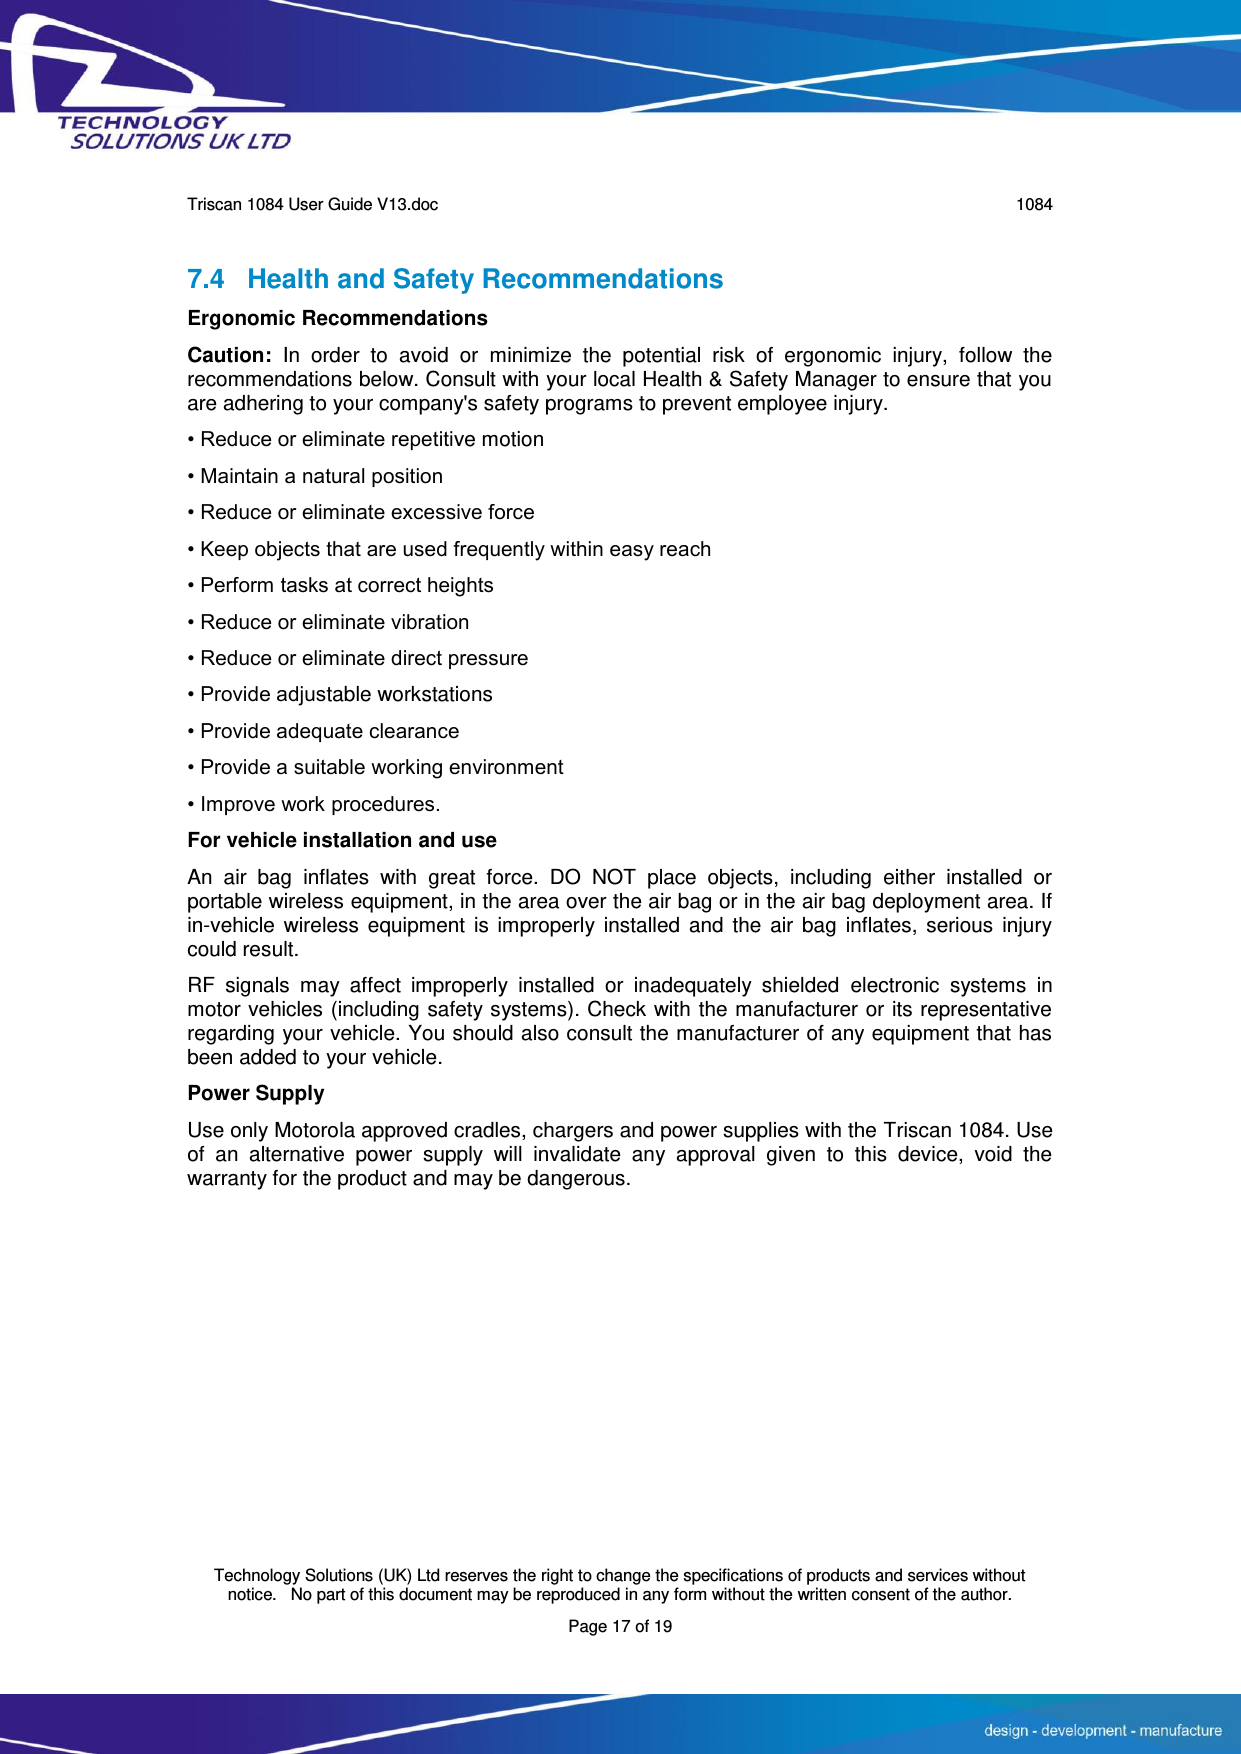      Triscan 1084 User Guide V13.doc   1084  Technology Solutions (UK) Ltd reserves the right to change the specifications of products and services without notice.   No part of this document may be reproduced in any form without the written consent of the author. Page 17 of 19 7.4 Health and Safety Recommendations Ergonomic Recommendations Caution:  In  order  to  avoid  or  minimize  the  potential  risk  of  ergonomic  injury,  follow  the recommendations below. Consult with your local Health &amp; Safety Manager to ensure that you are adhering to your company&apos;s safety programs to prevent employee injury. • Reduce or eliminate repetitive motion • Maintain a natural position • Reduce or eliminate excessive force • Keep objects that are used frequently within easy reach • Perform tasks at correct heights • Reduce or eliminate vibration • Reduce or eliminate direct pressure • Provide adjustable workstations • Provide adequate clearance • Provide a suitable working environment • Improve work procedures. For vehicle installation and use An  air  bag  inflates  with  great  force.  DO  NOT  place  objects,  including  either  installed  or portable wireless equipment, in the area over the air bag or in the air bag deployment area. If in-vehicle  wireless equipment  is improperly installed  and  the air bag  inflates, serious  injury could result. RF  signals  may  affect  improperly  installed  or  inadequately  shielded  electronic  systems  in motor vehicles (including safety systems). Check with the manufacturer or its representative regarding your vehicle. You should also consult the manufacturer of any equipment that has been added to your vehicle. Power Supply Use only Motorola approved cradles, chargers and power supplies with the Triscan 1084. Use of  an  alternative  power  supply  will  invalidate  any  approval  given  to  this  device,  void  the warranty for the product and may be dangerous. 